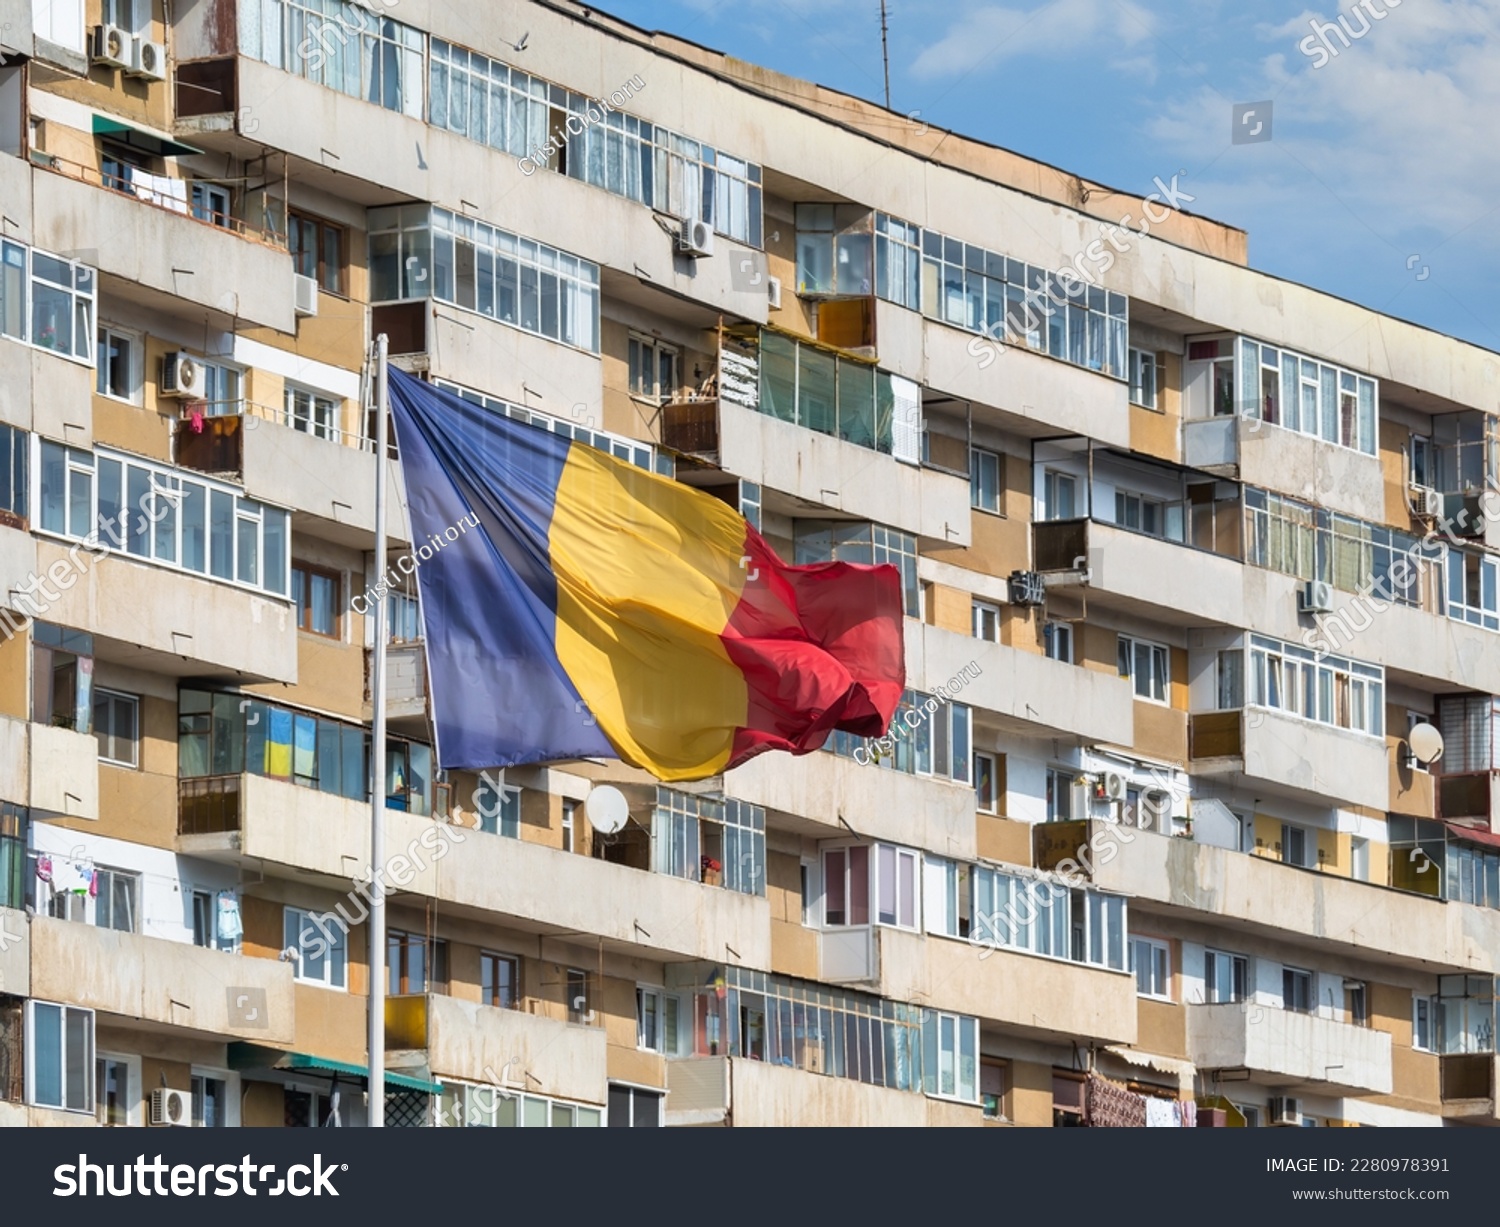 Romanian national flag in the wind and a worn out communist apartment building in the background, in Bucharest Romania. #2280978391